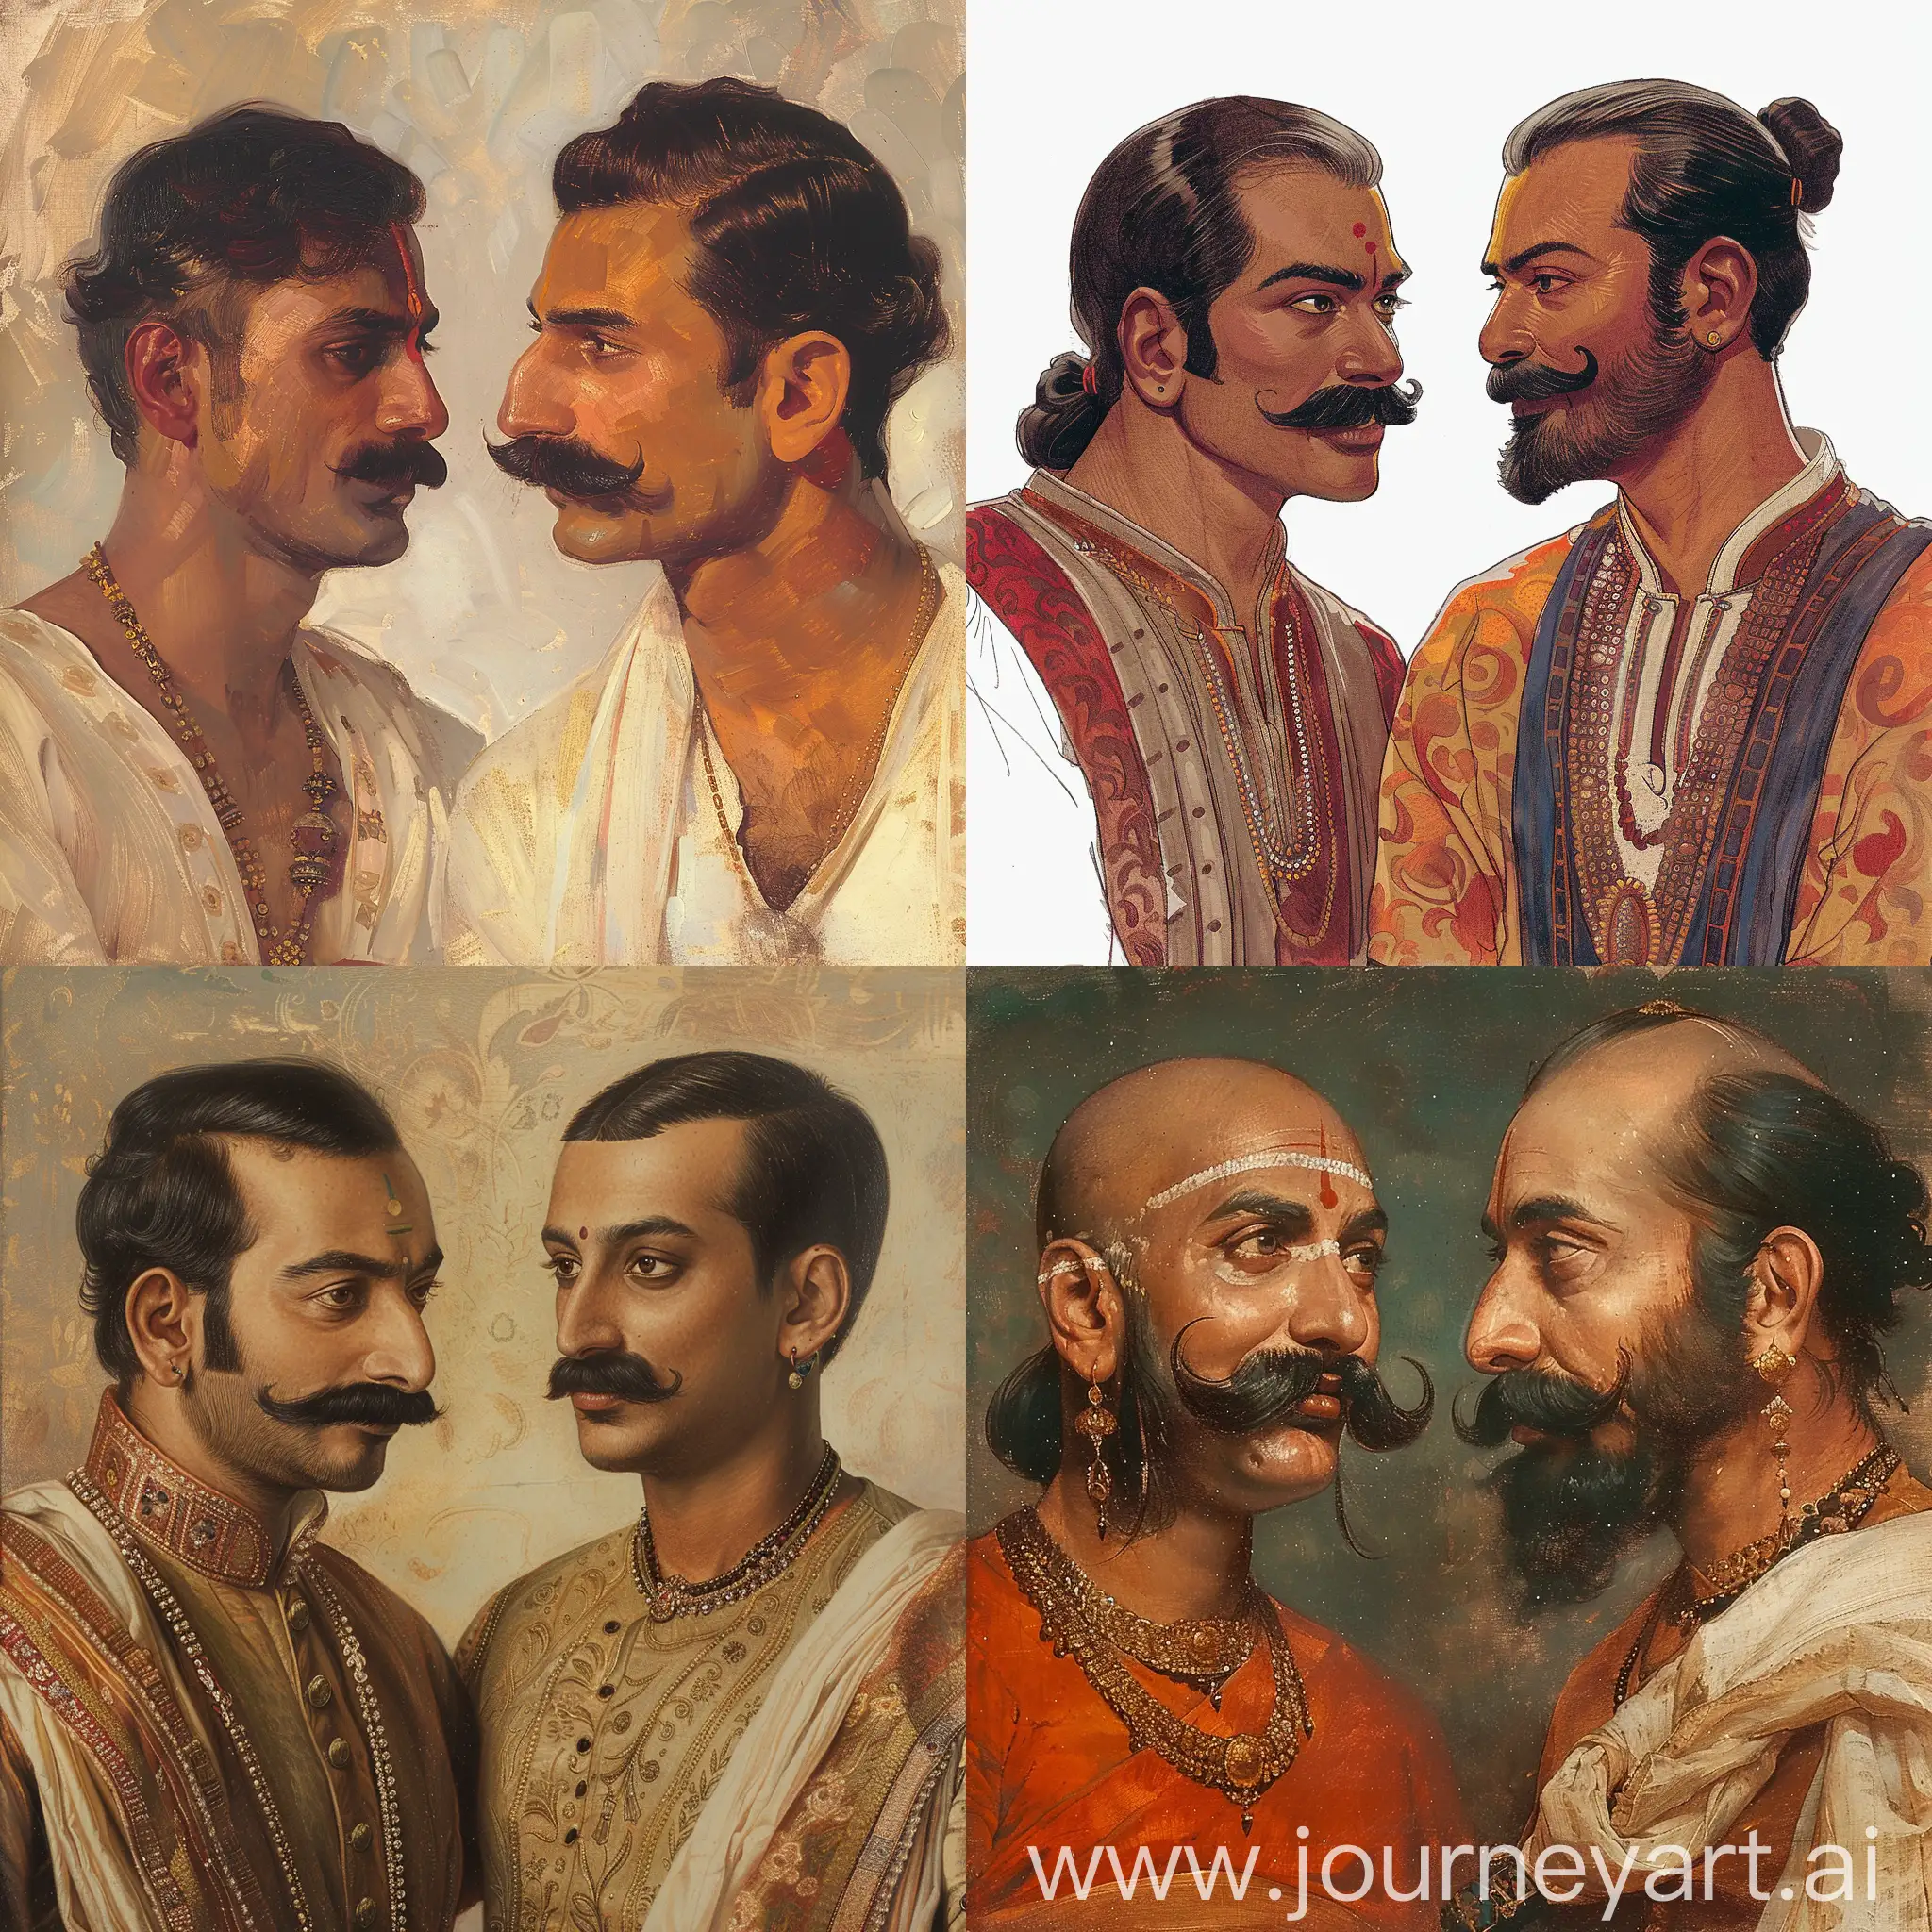 Year is 1600 CE. Imagine two rajput men who are talking calmly to each other. Both have moustache and clean shaved